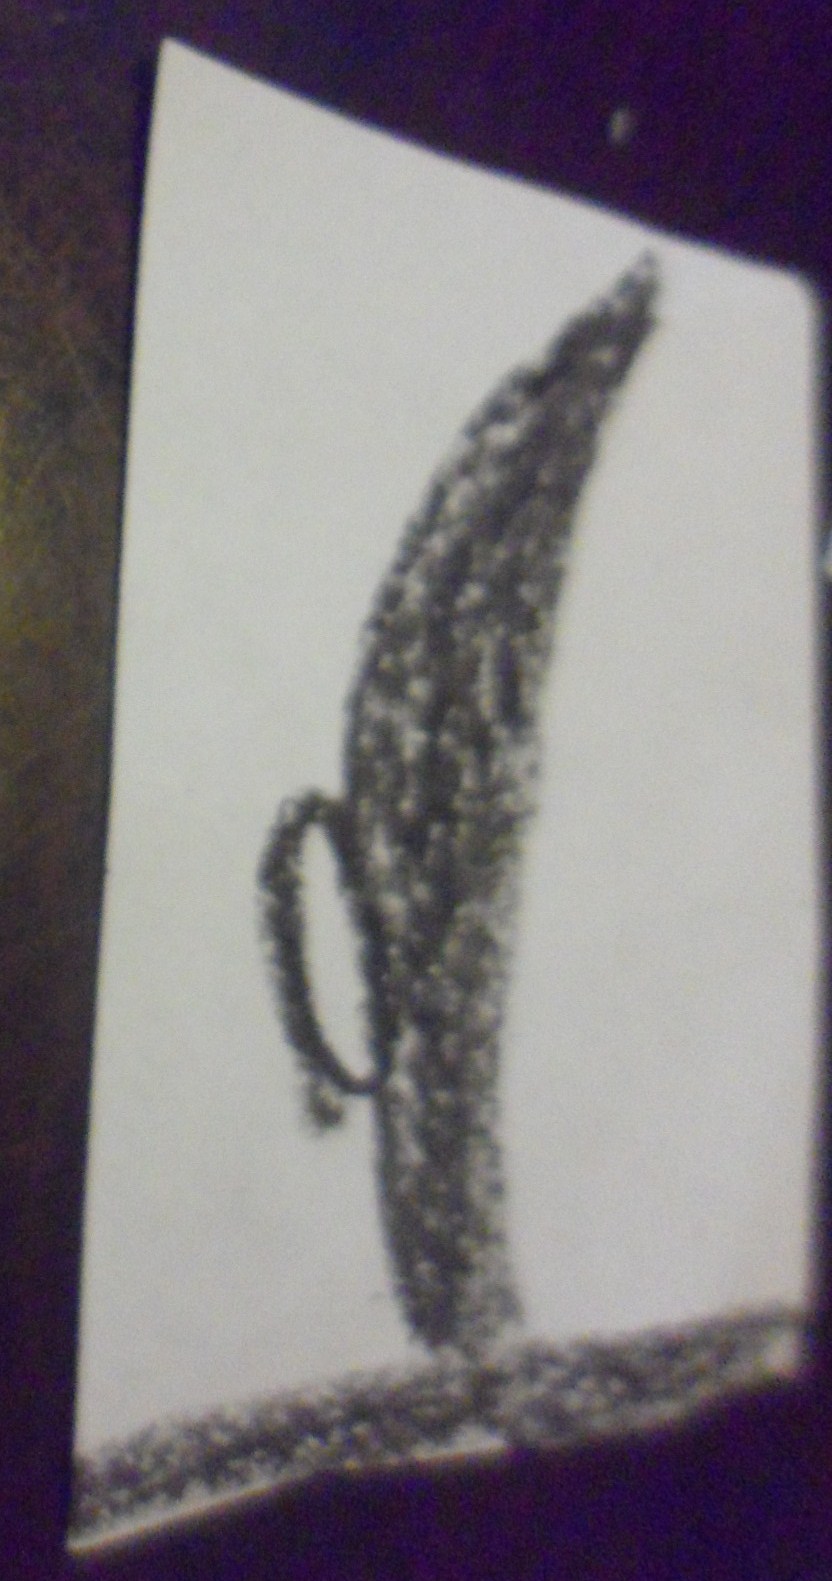 This is supposed to be a sword.  It wasn't in the book or in his drawing but he wanted it to be one of the pictures.